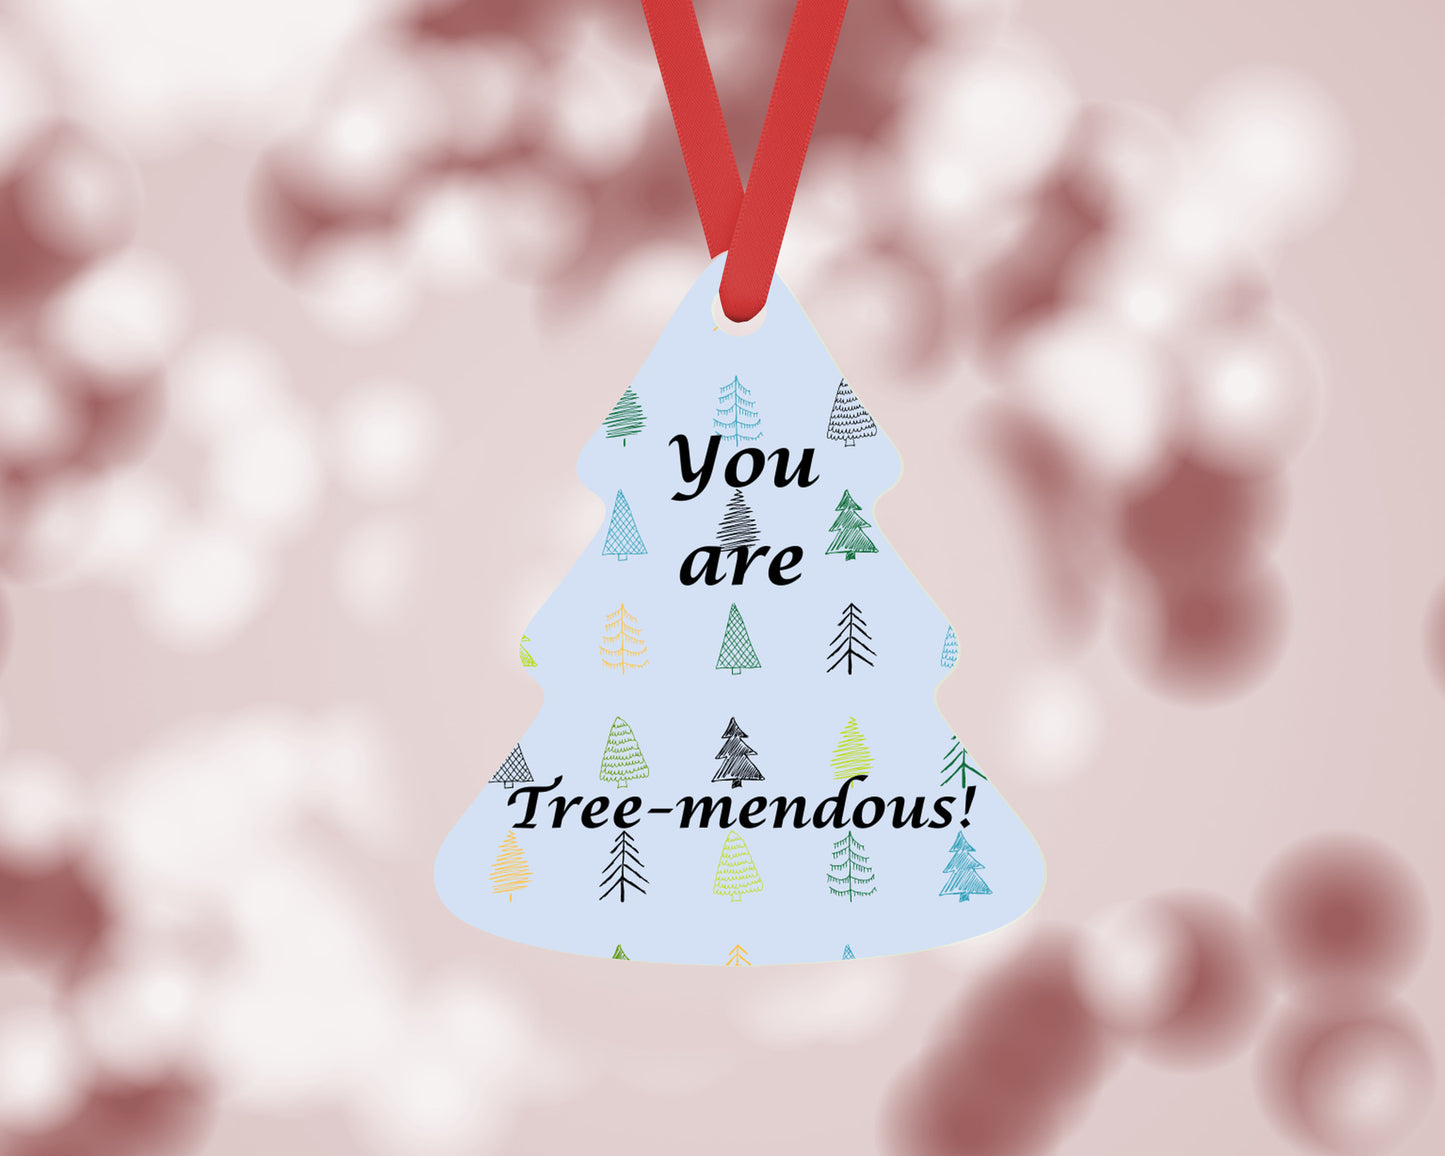 You are treemendous! - Christmas Ornament